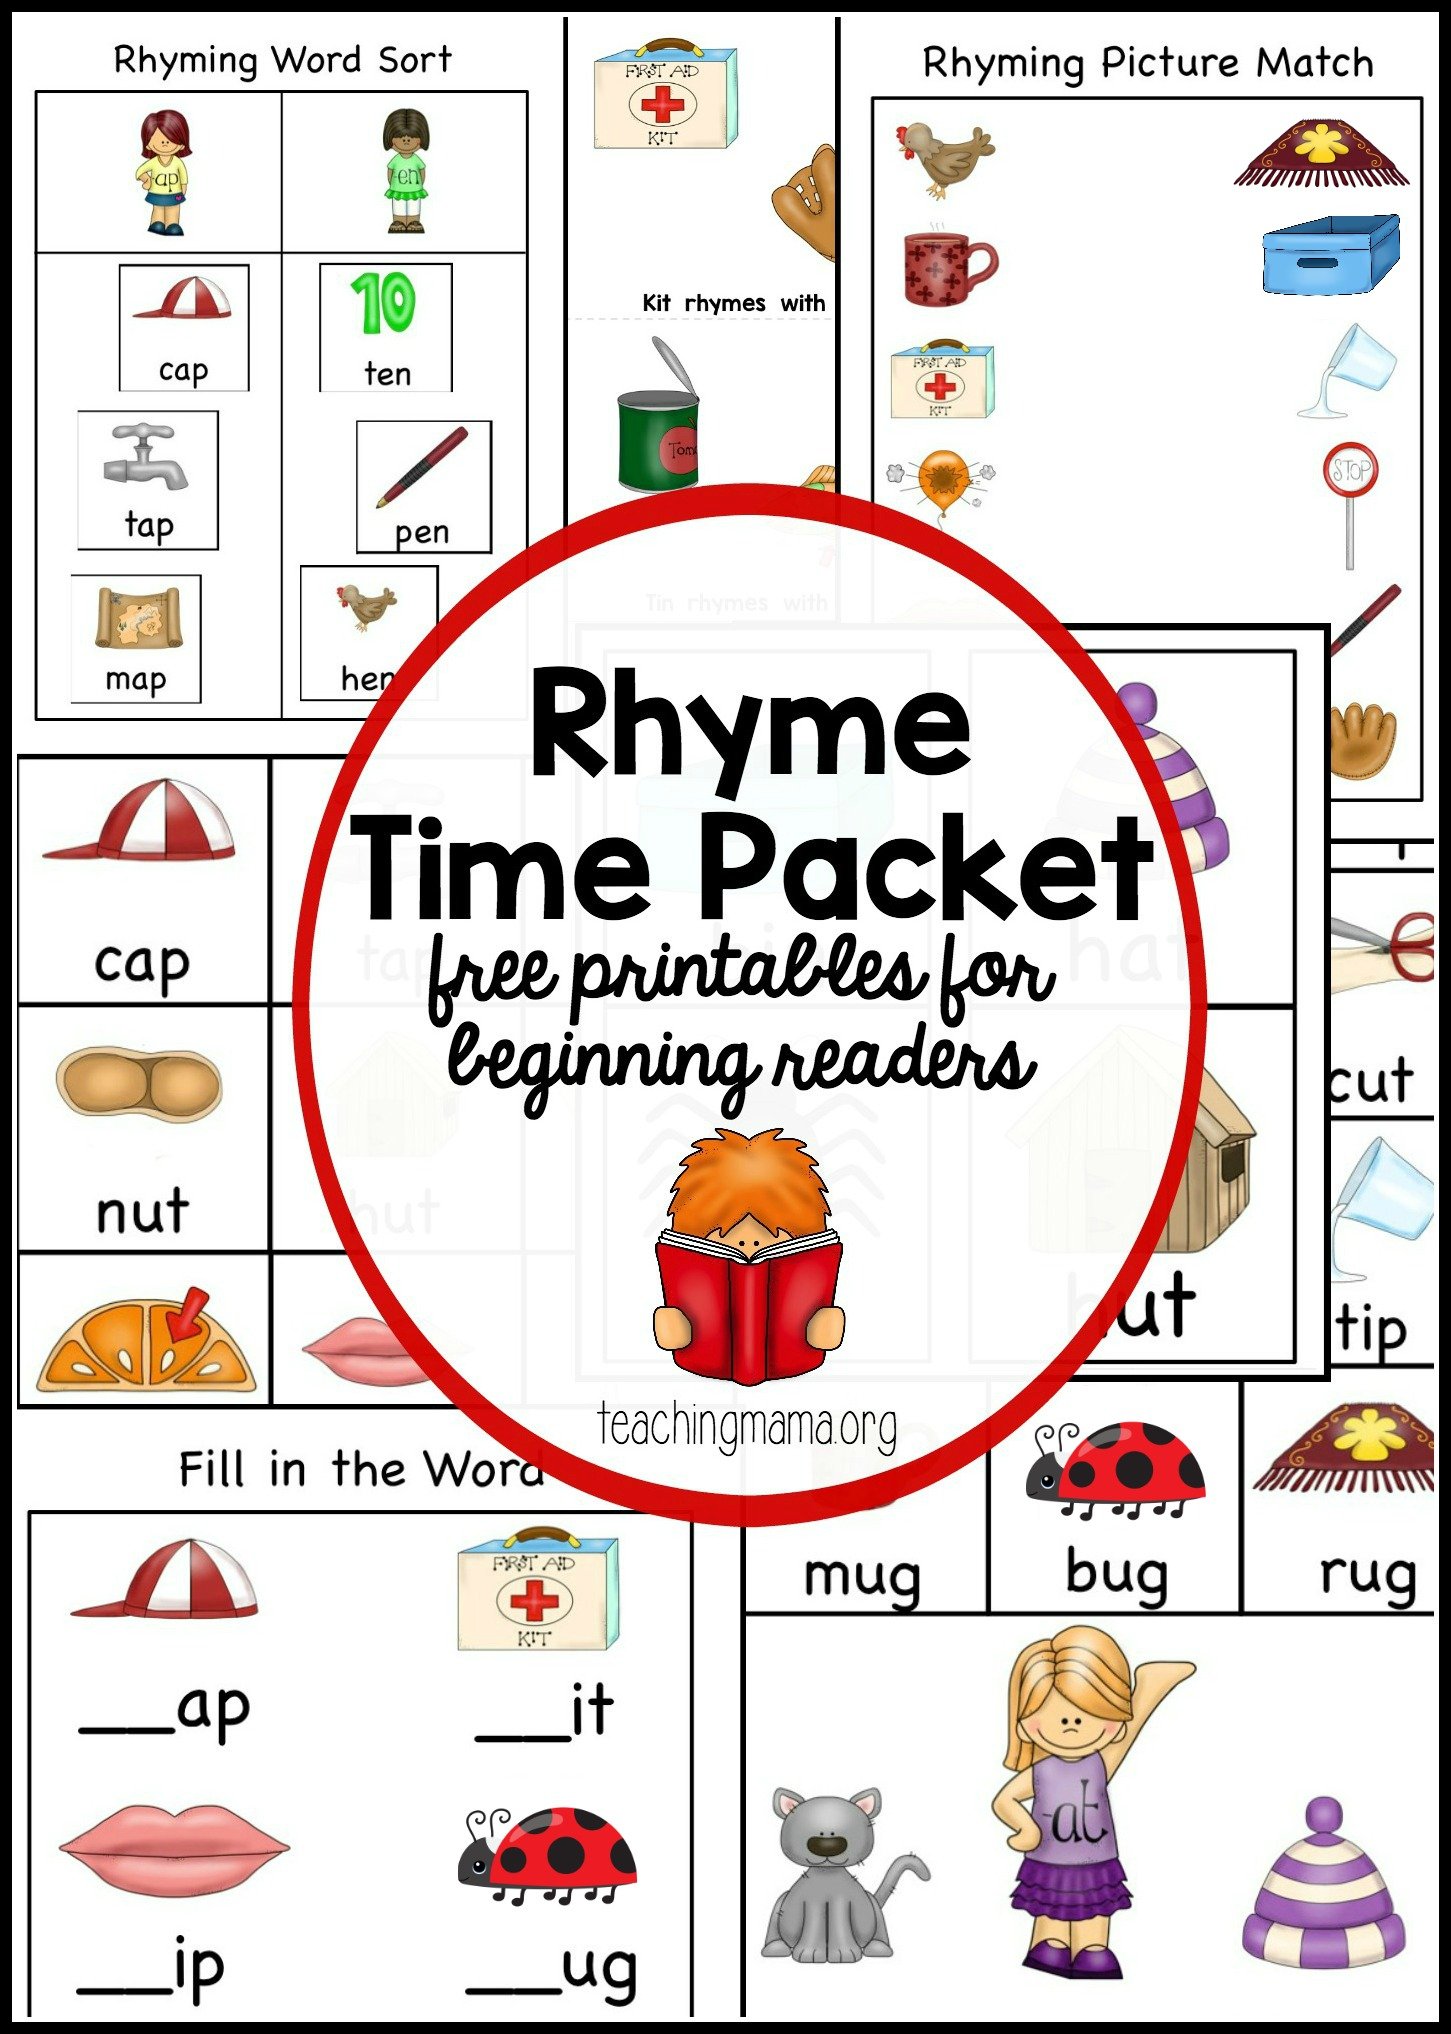 Rhyme Time Packet